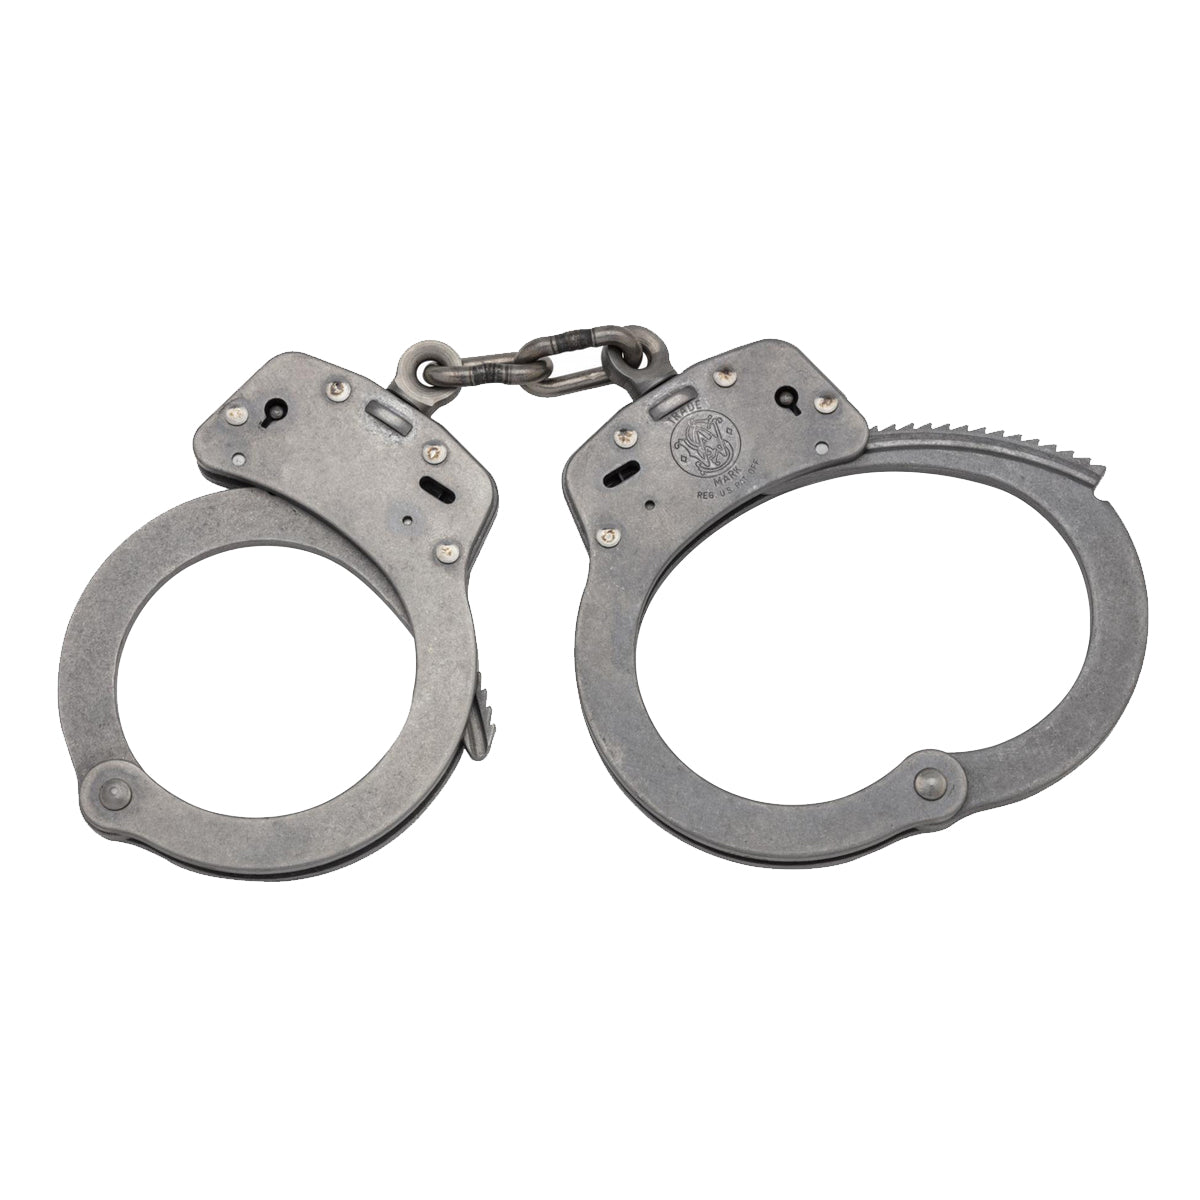 Buy Smith & Wesson Model 103 Stainless Steel Handcuffs